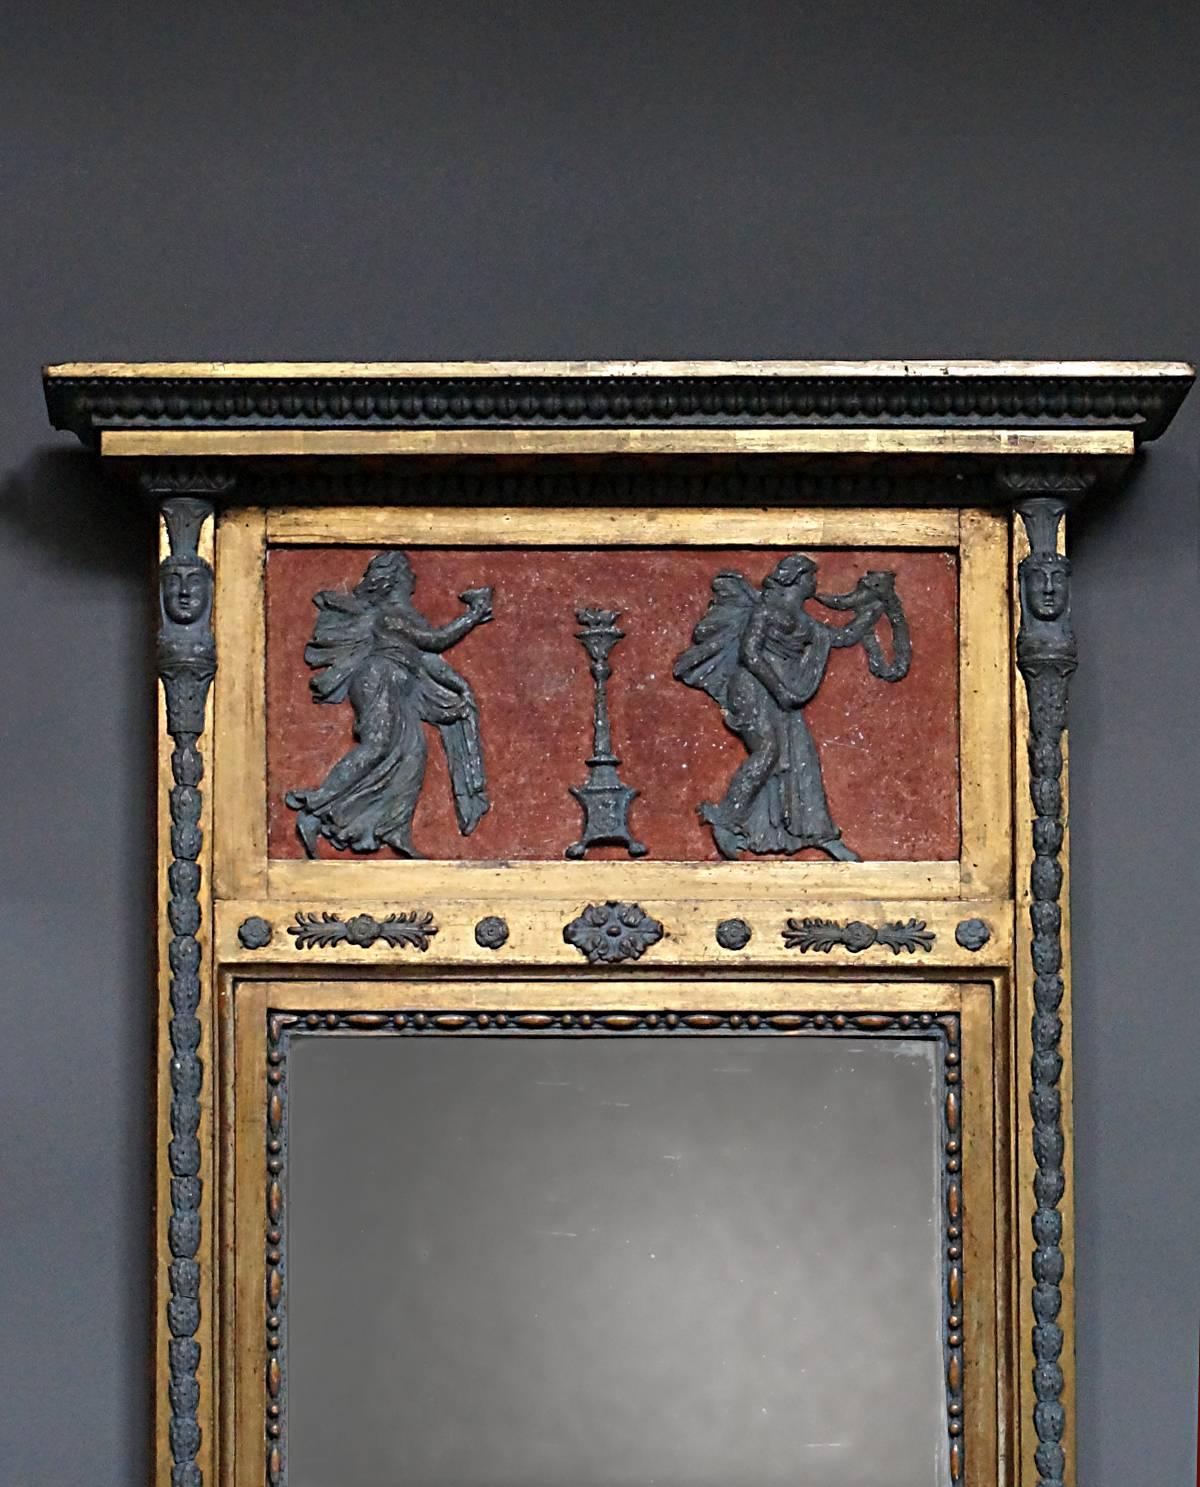 Period neoclassical mirror, Sweden, circa 1820, with original two-part mirror glass and back. The top frieze features two female figures in bas relief bearing symbols of victory. Below the mirror is a panel with sphinxes. The entire frame is